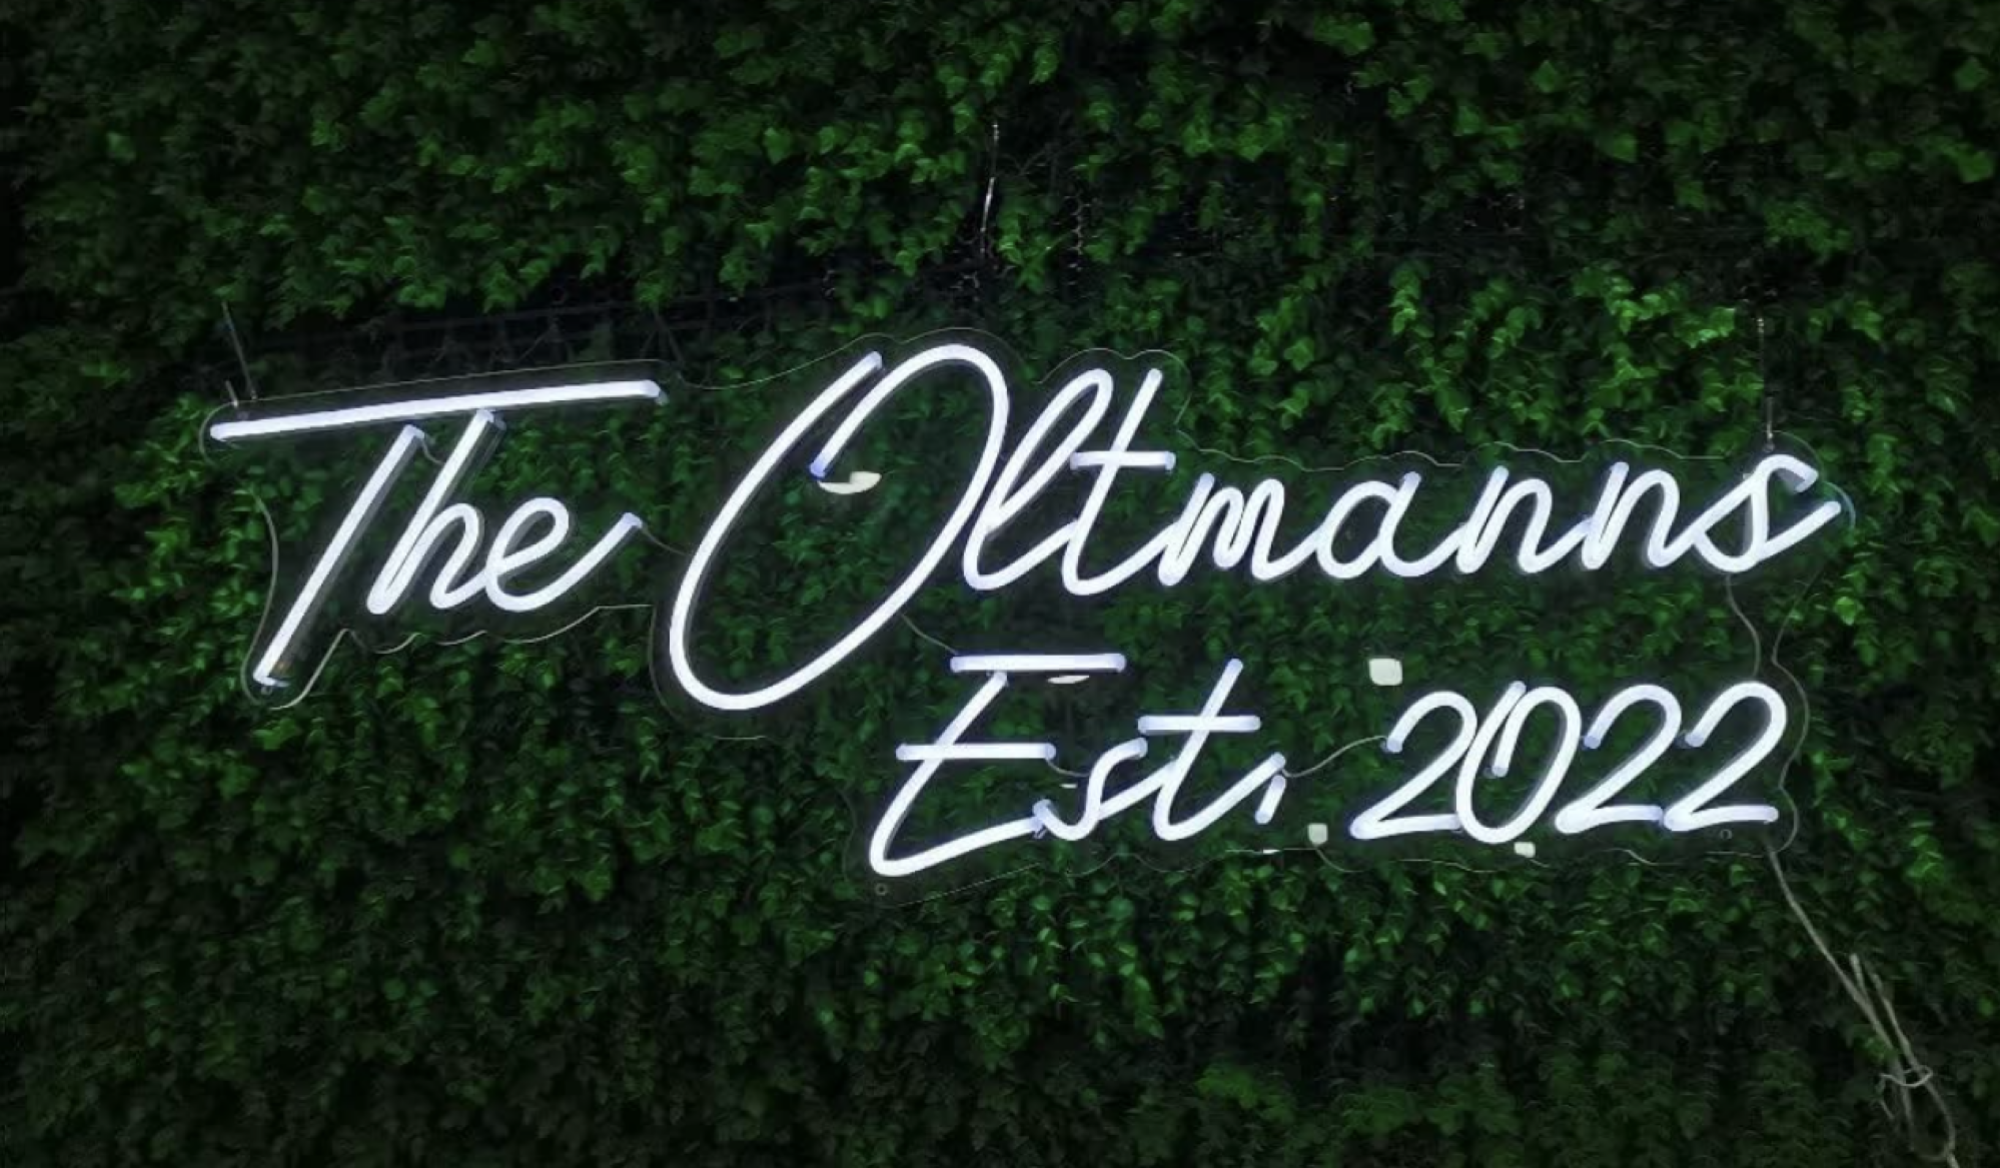 custom neon sign that reads 'The Oltmanns / Est 2022'